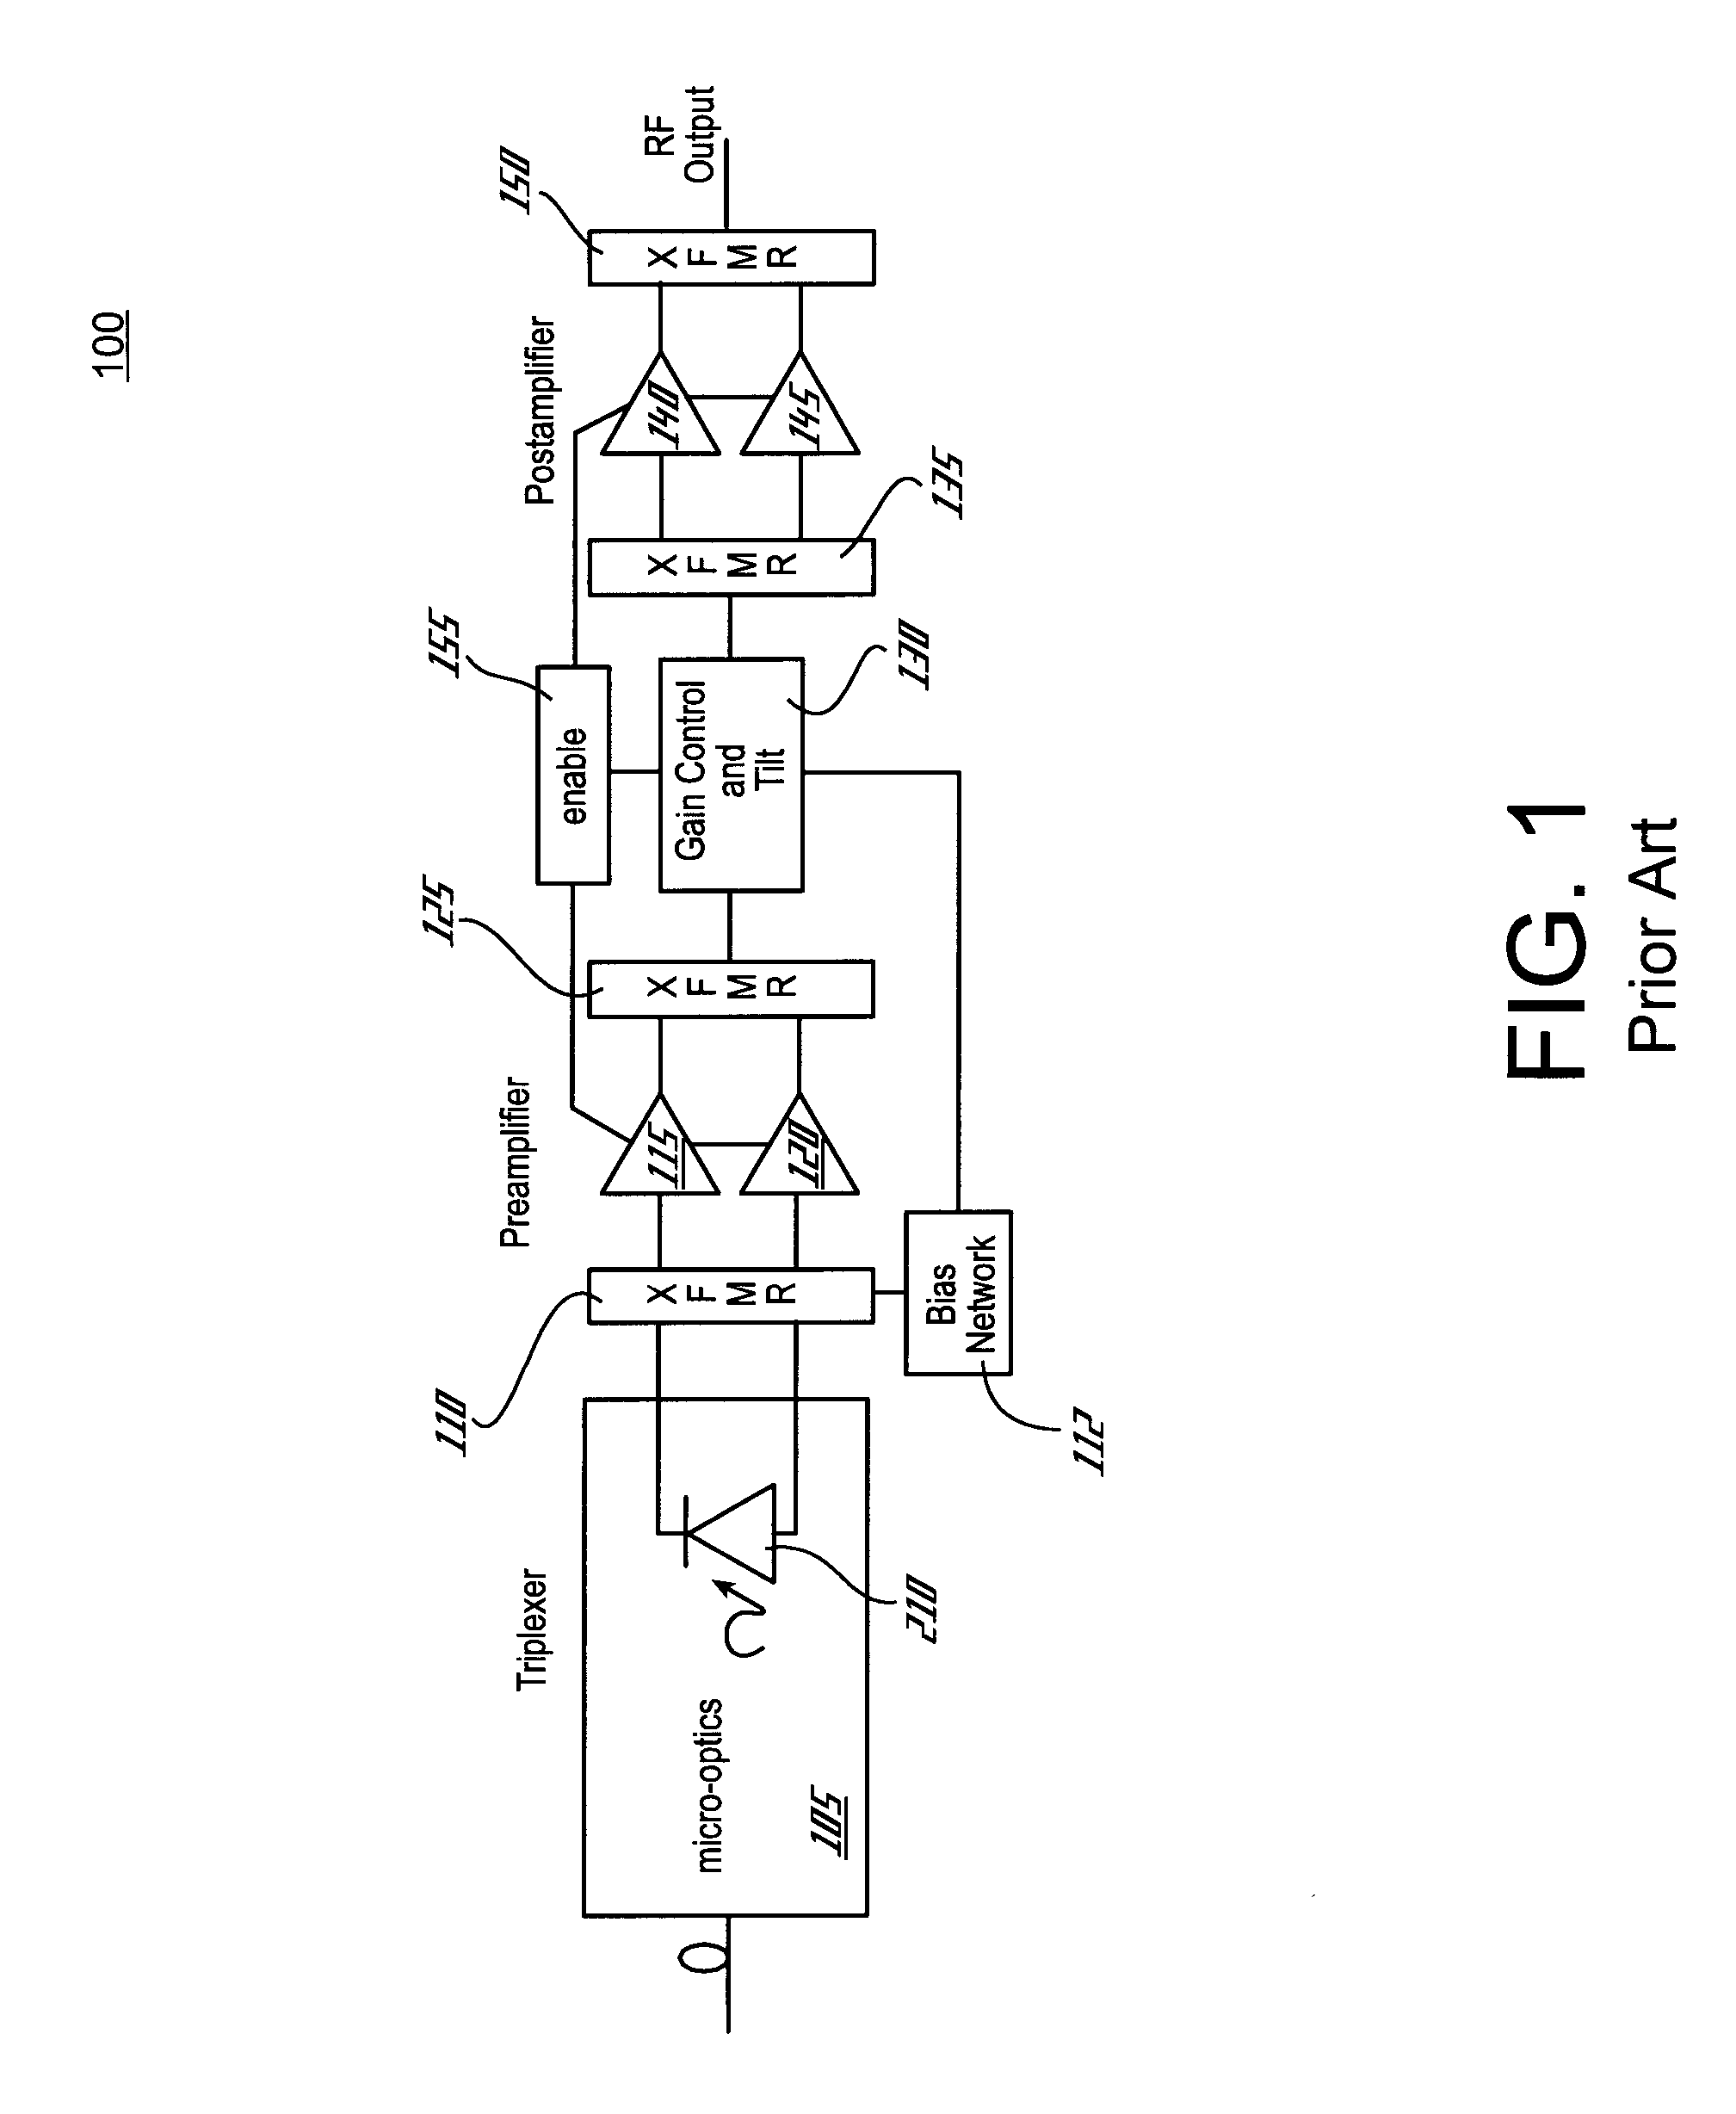 Fiber-to-the-home (FTTH) optical receiver with distributed gain control